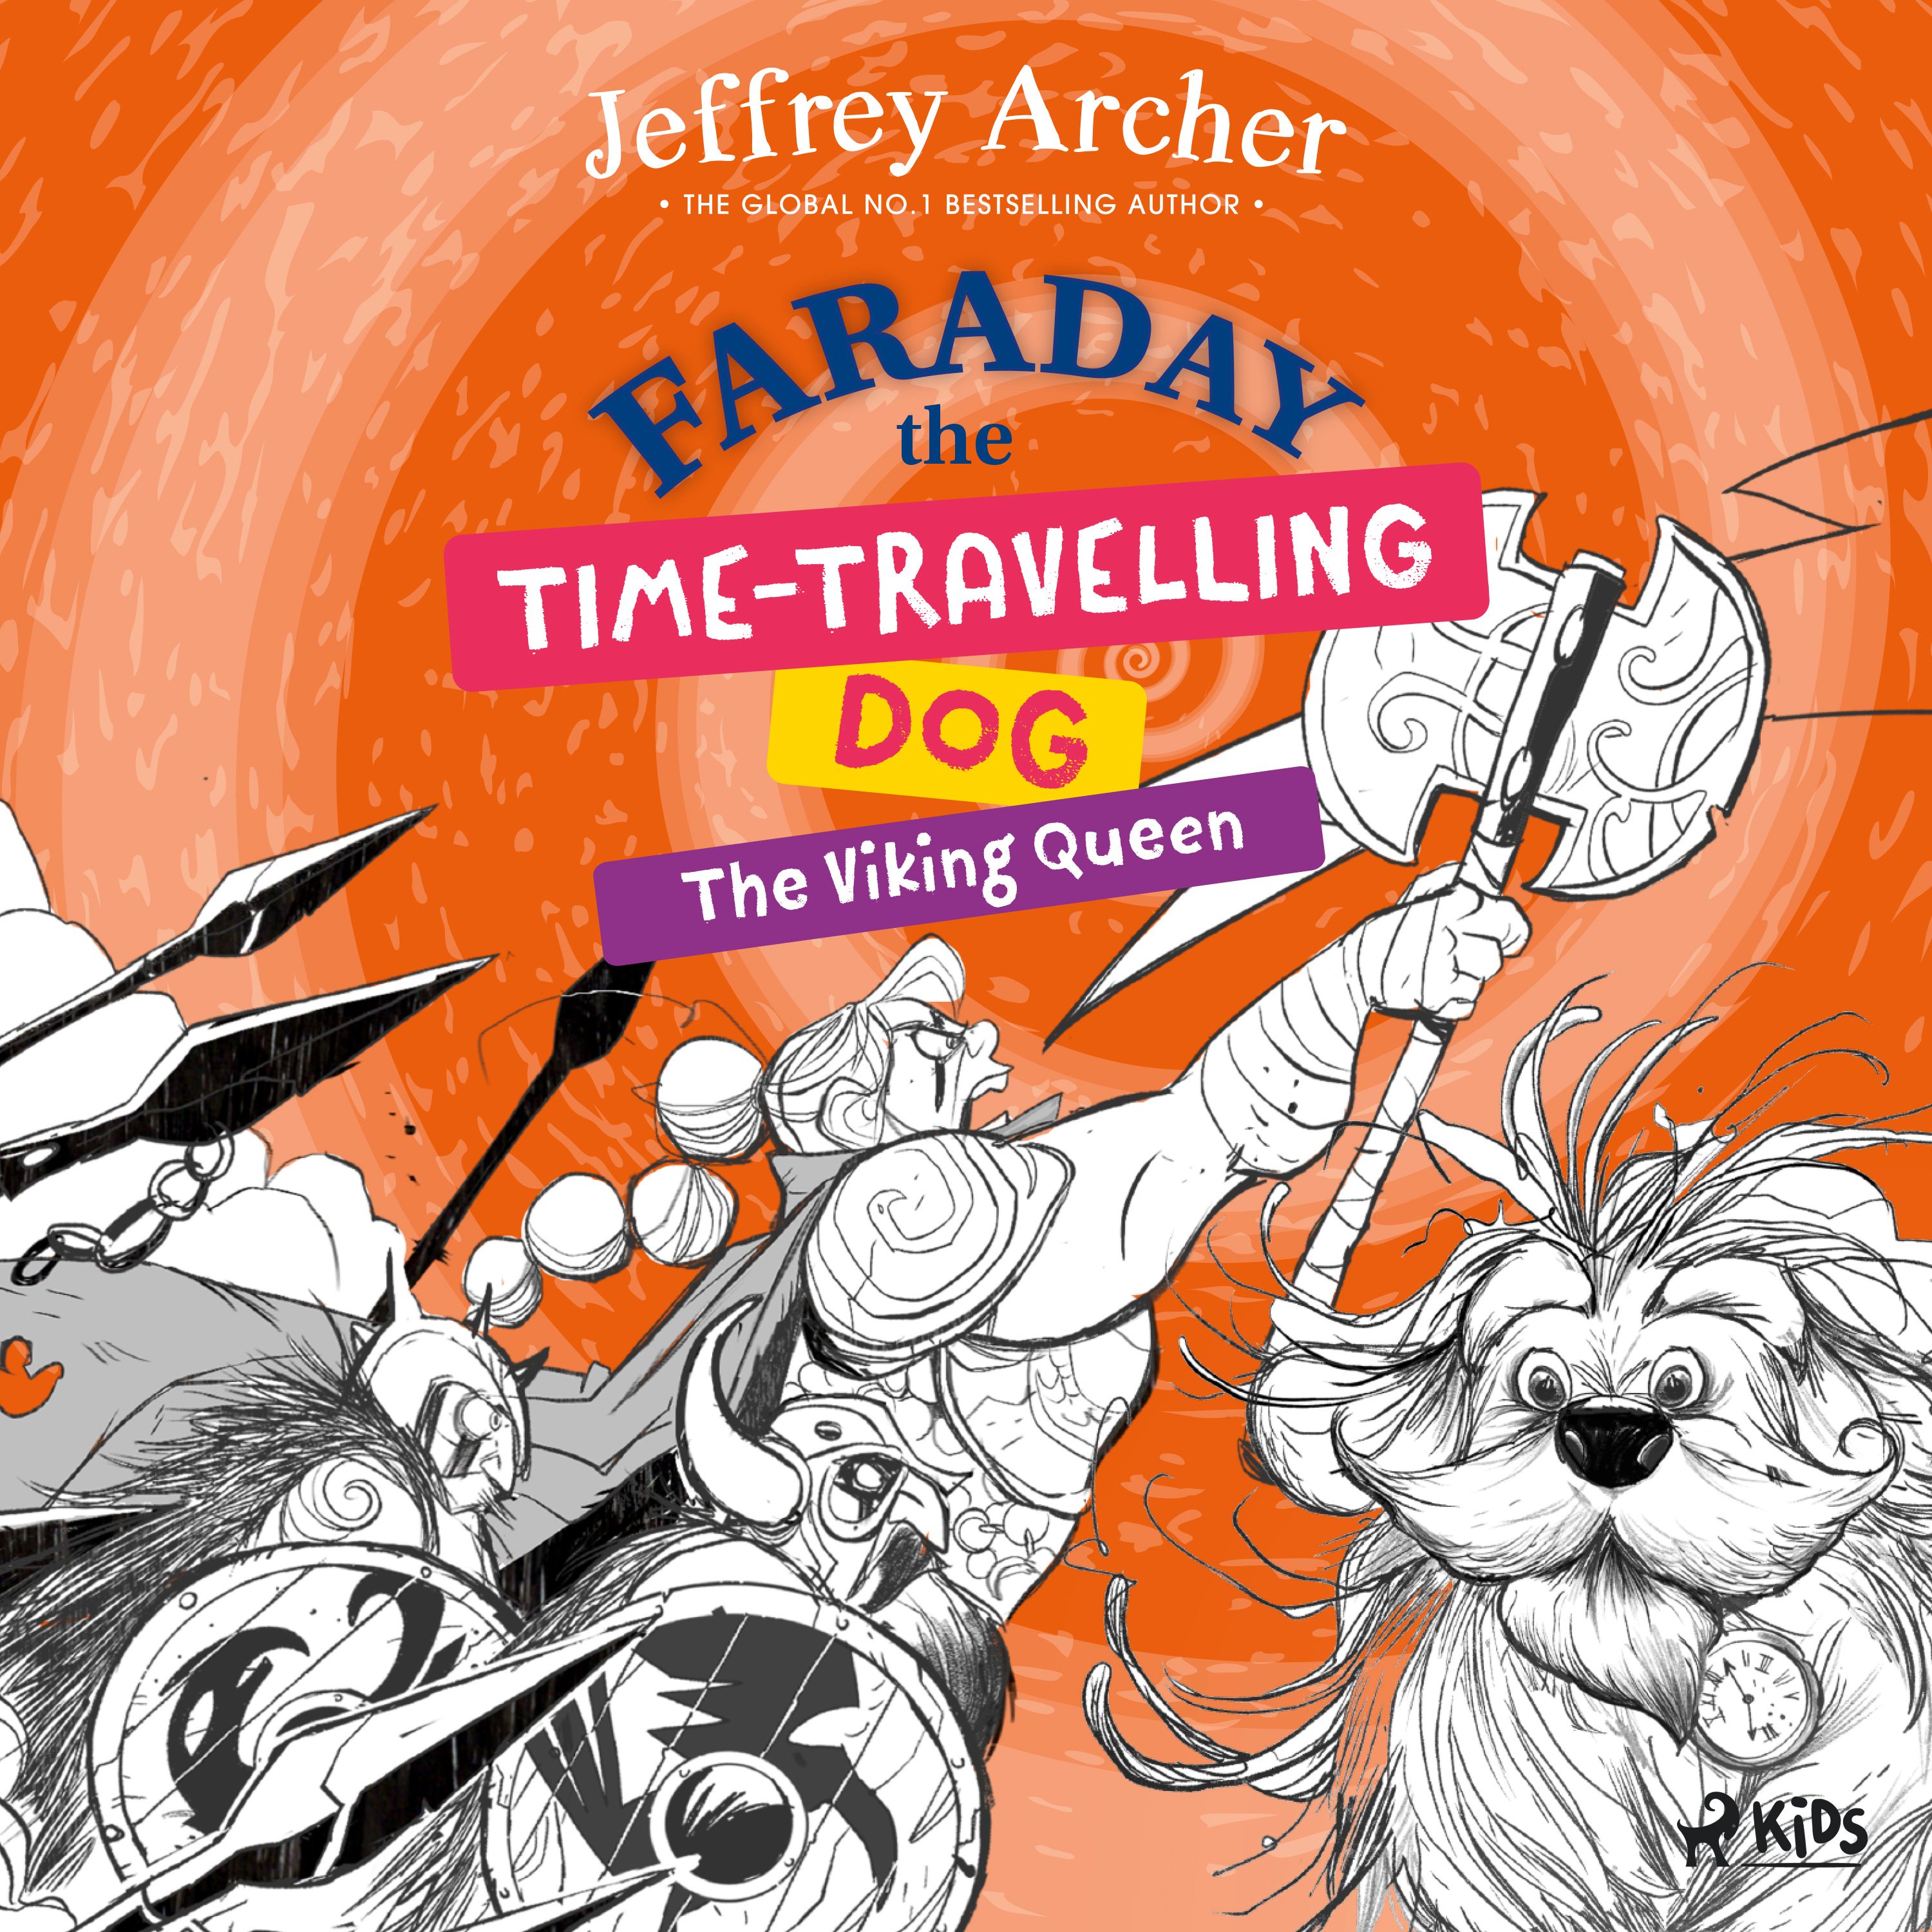 Faraday The Time-Travelling Dog: The Viking Queen, audiobook by Jeffrey Archer